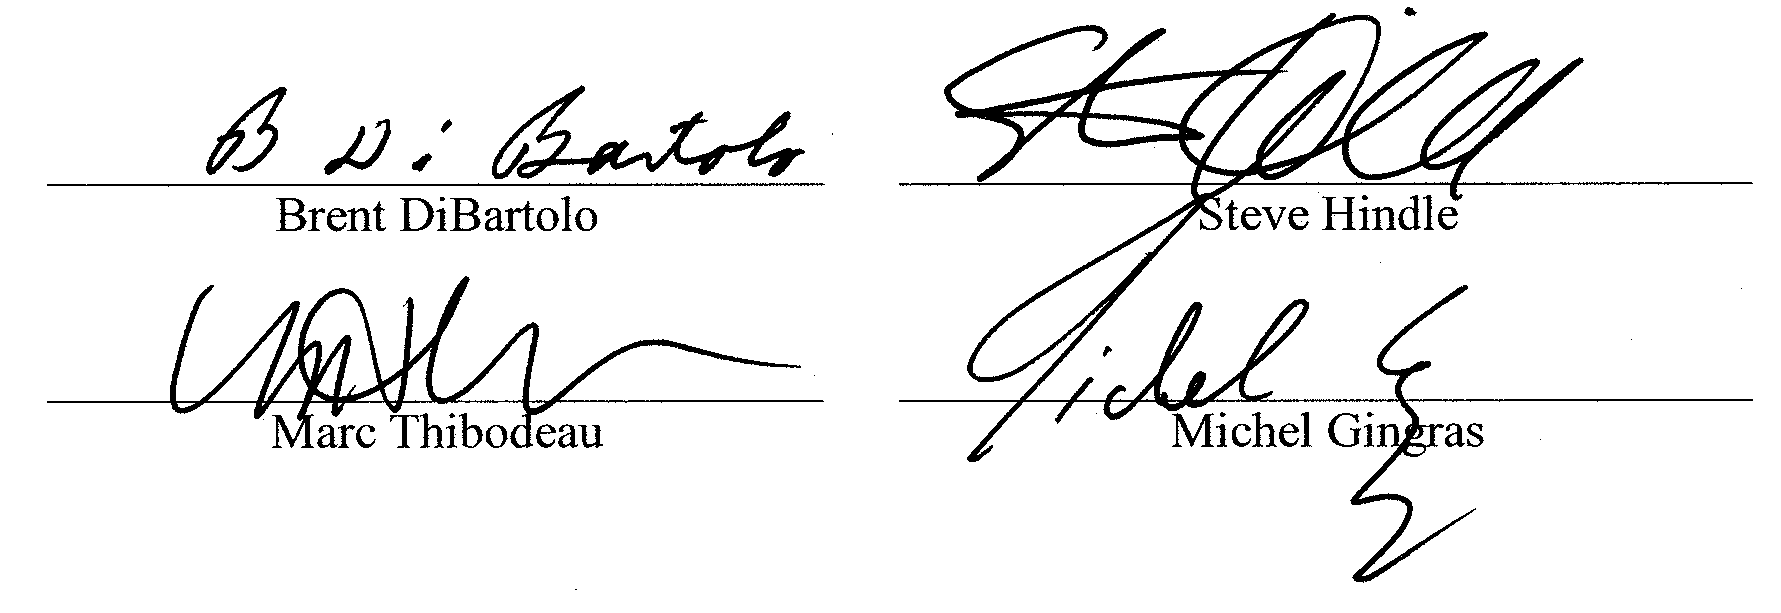 Page Signature - Appendice  G  - Convention ASE